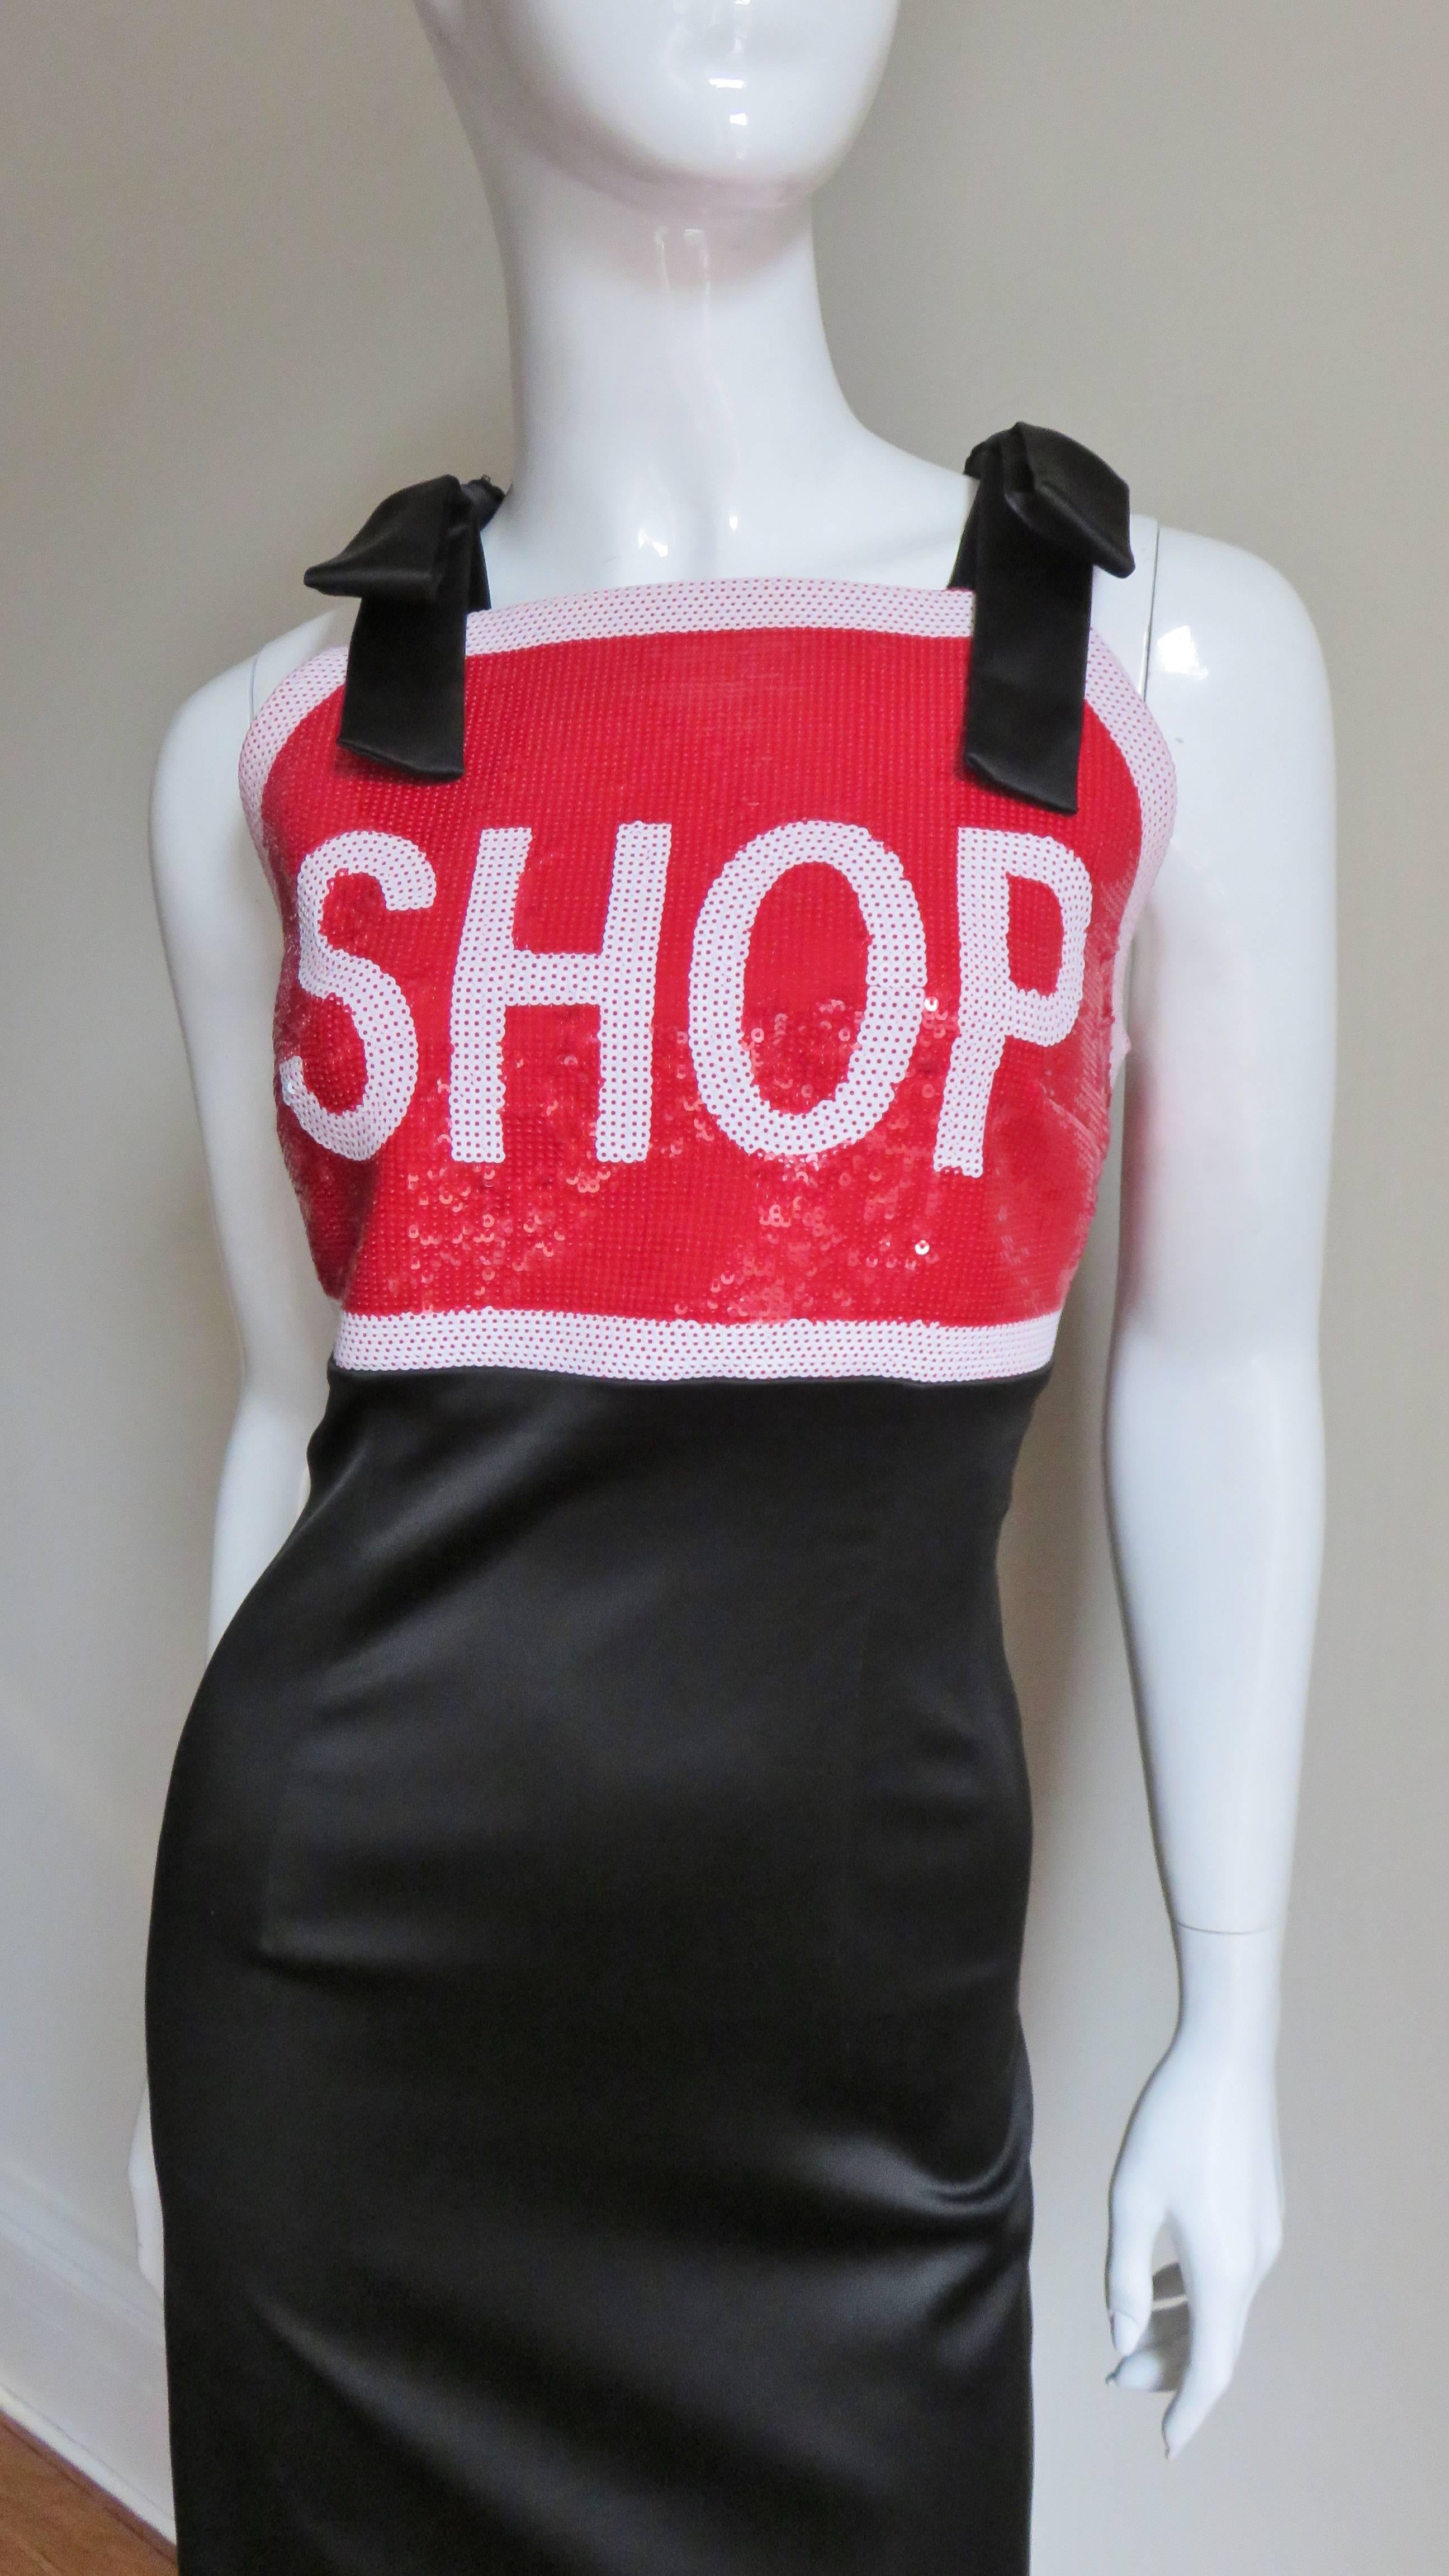 A fun dress in black, red and white by Jeremy Scott for Moschino Couture.  The front bodice portion is a play on a STOP sign consisting of white sequins with the word SHOP on a red sequin background.  It has black bow shoulder straps matching the